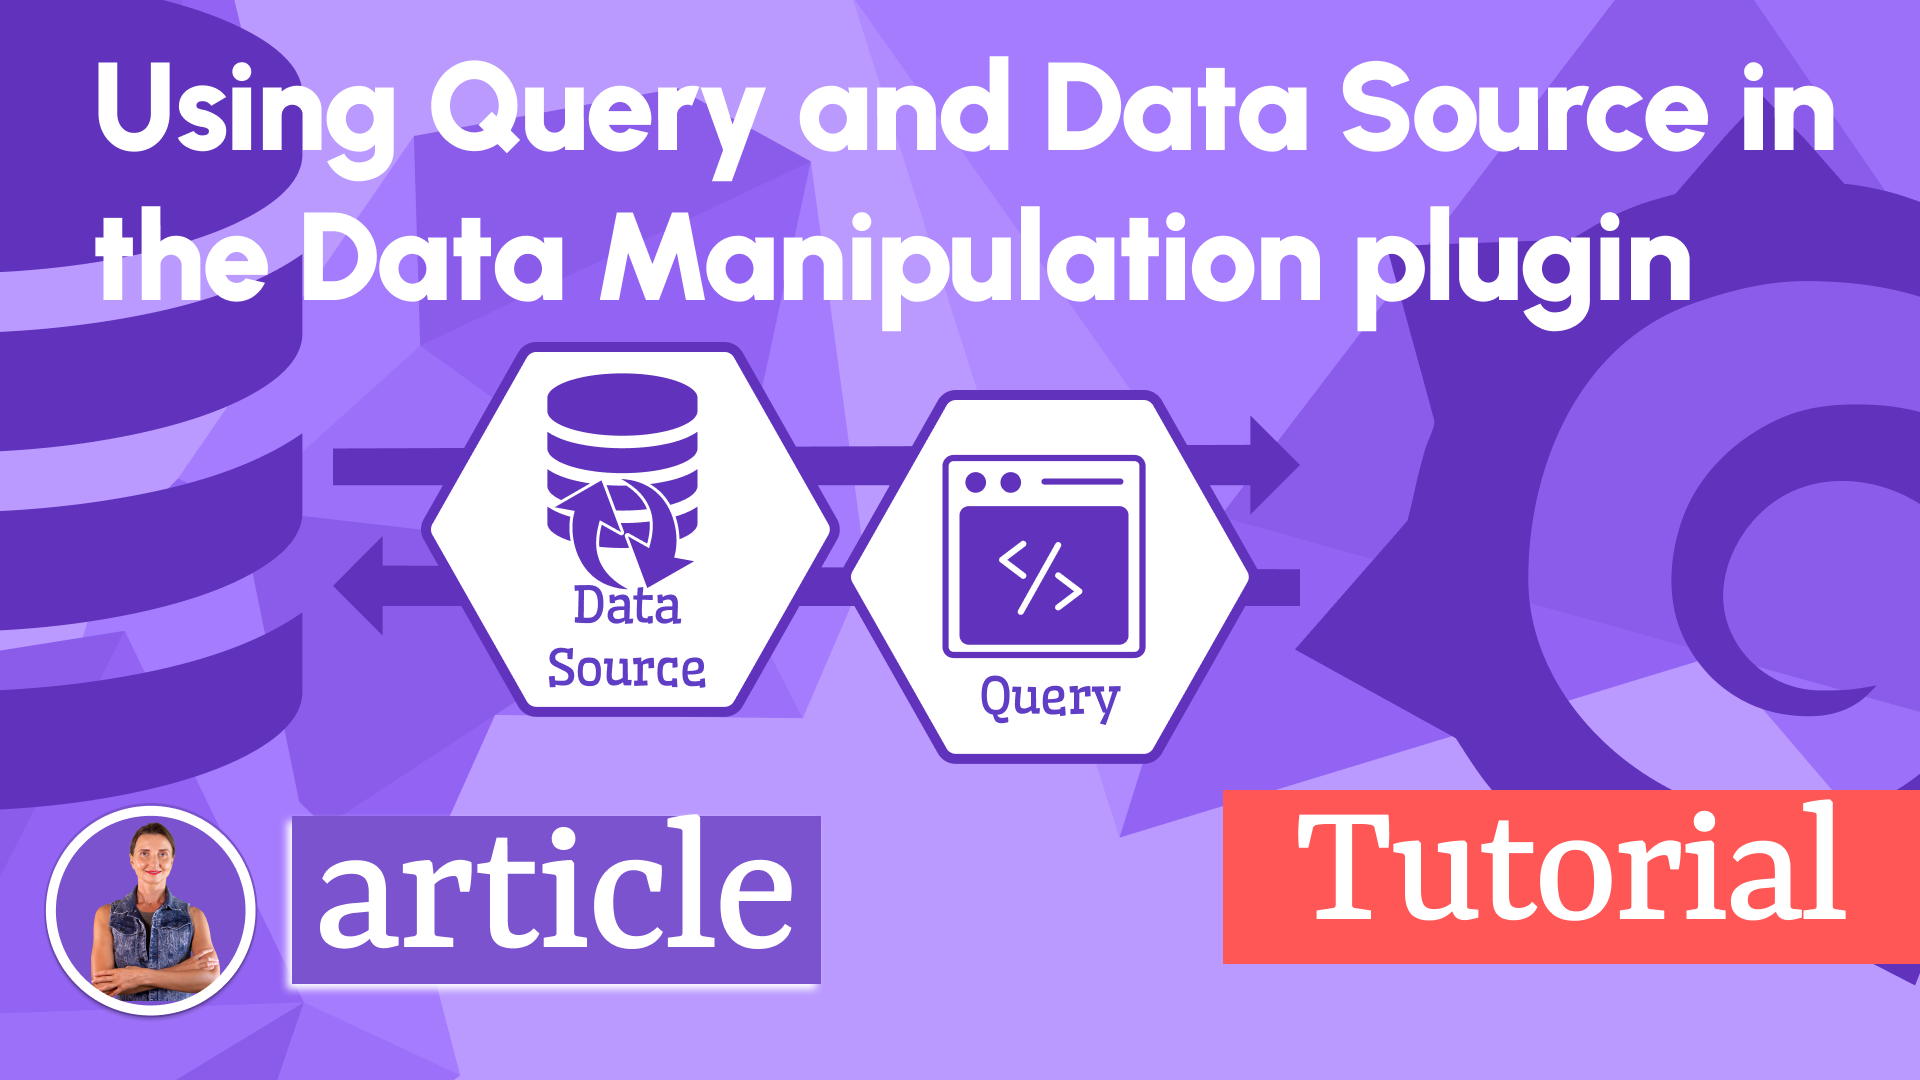 Using Query and Data Sources in the Data Manipulation plugin for Grafana